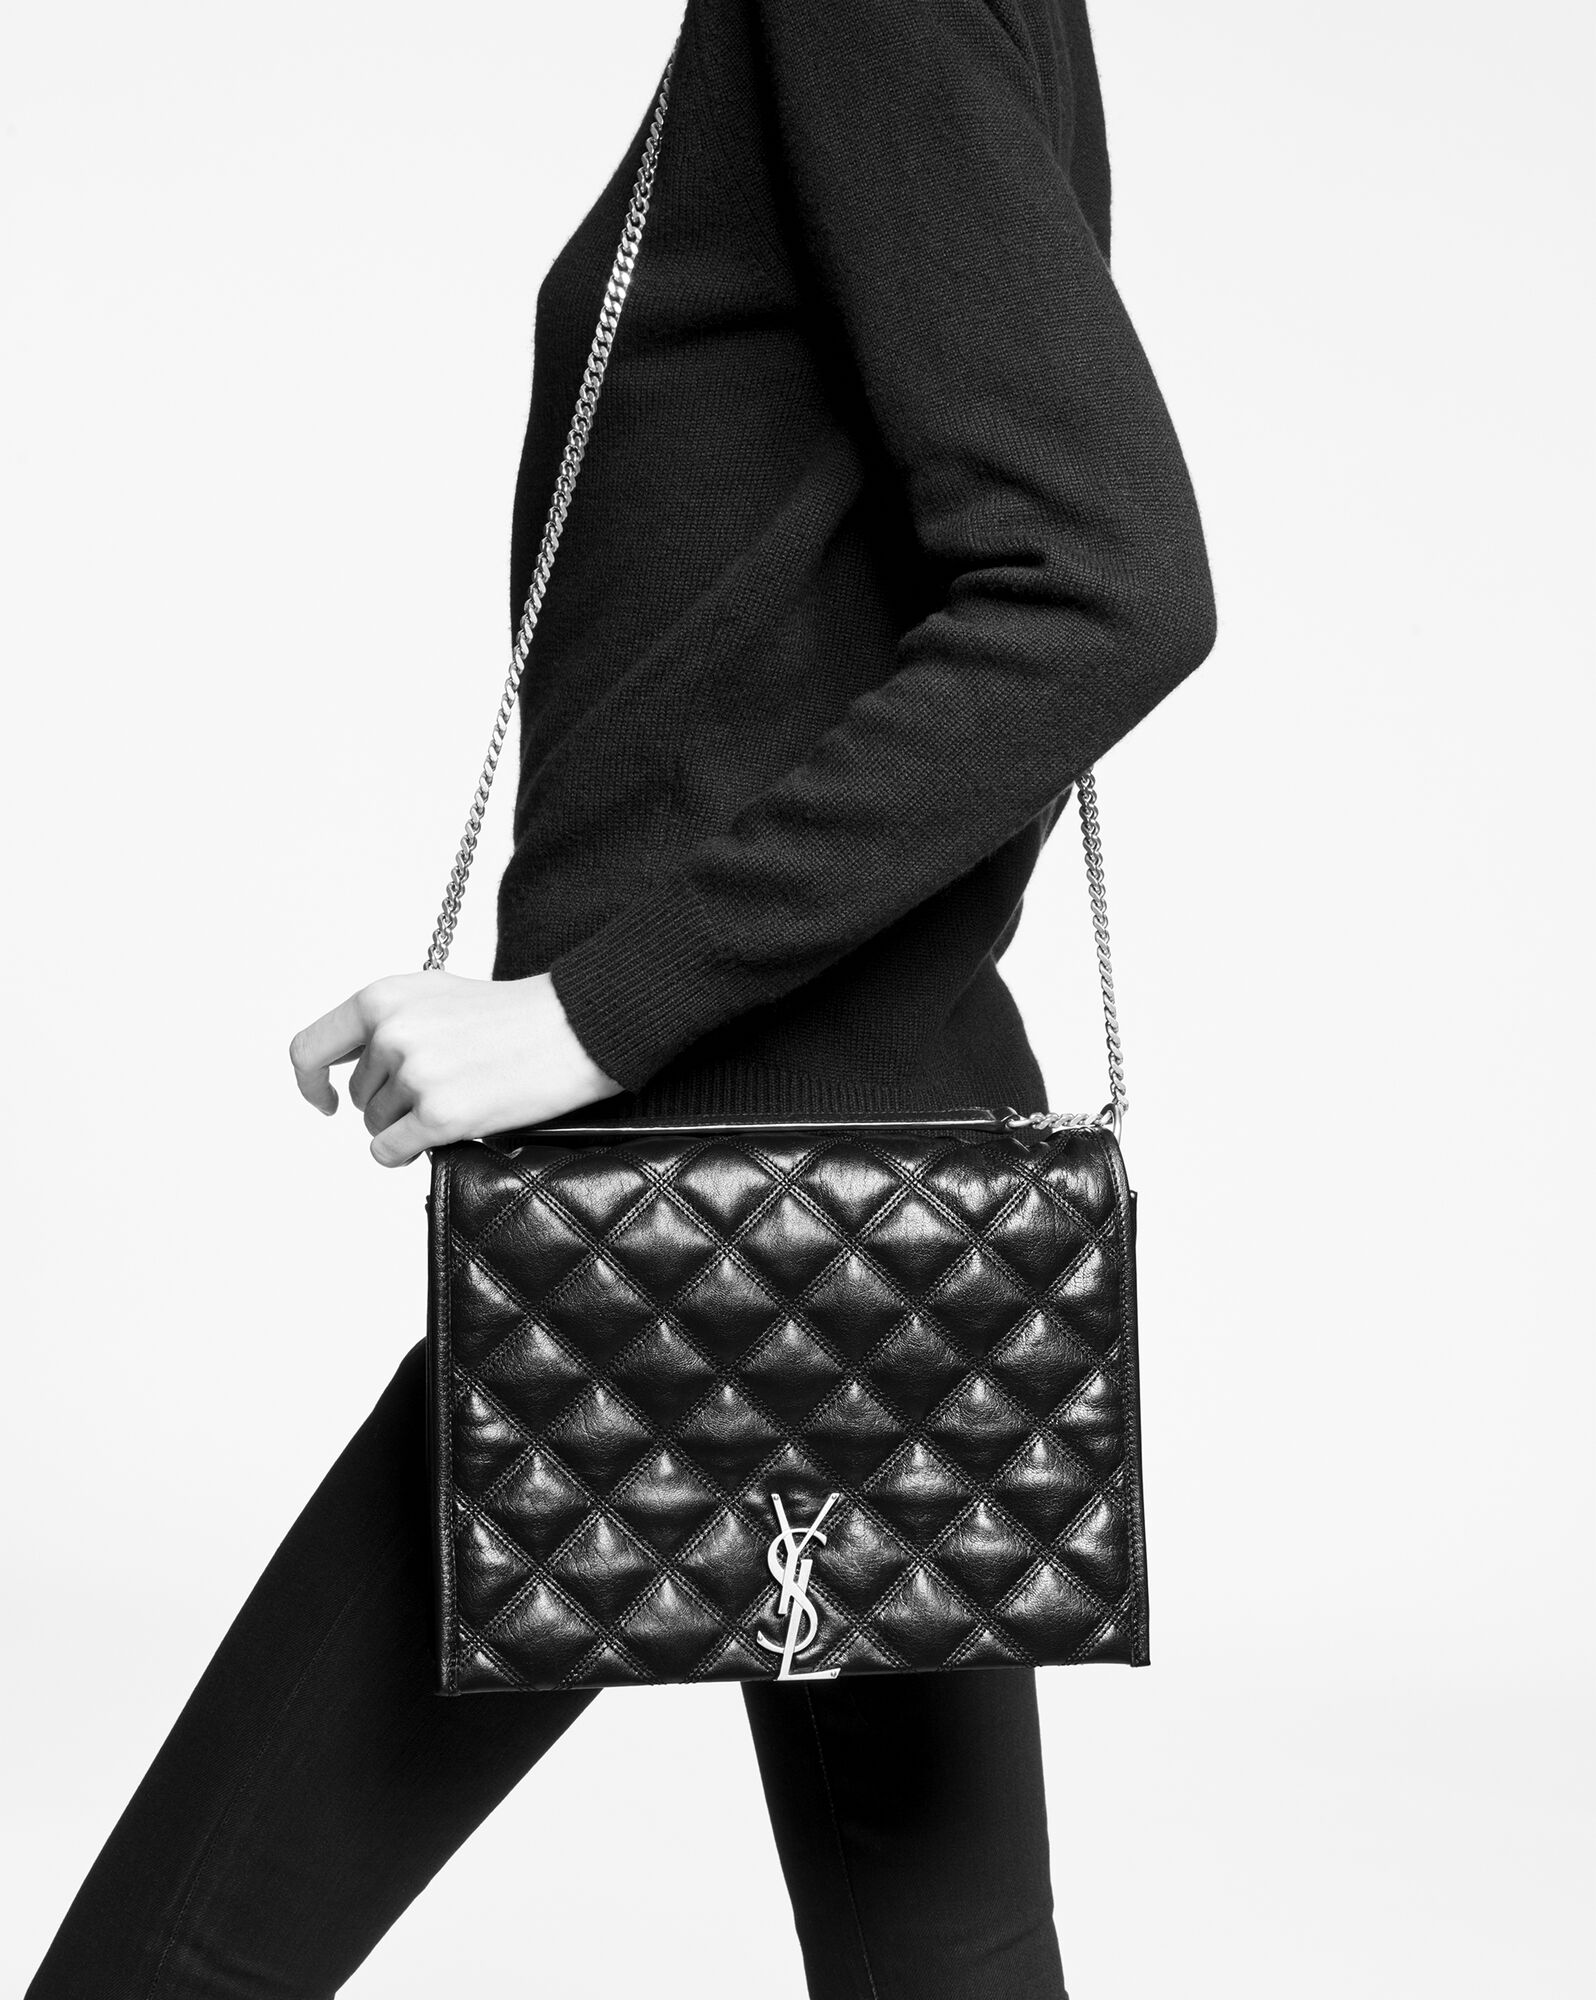 BECKY Small CHAIN bag in quilted lambskin | Saint Laurent Poland | YSL.com